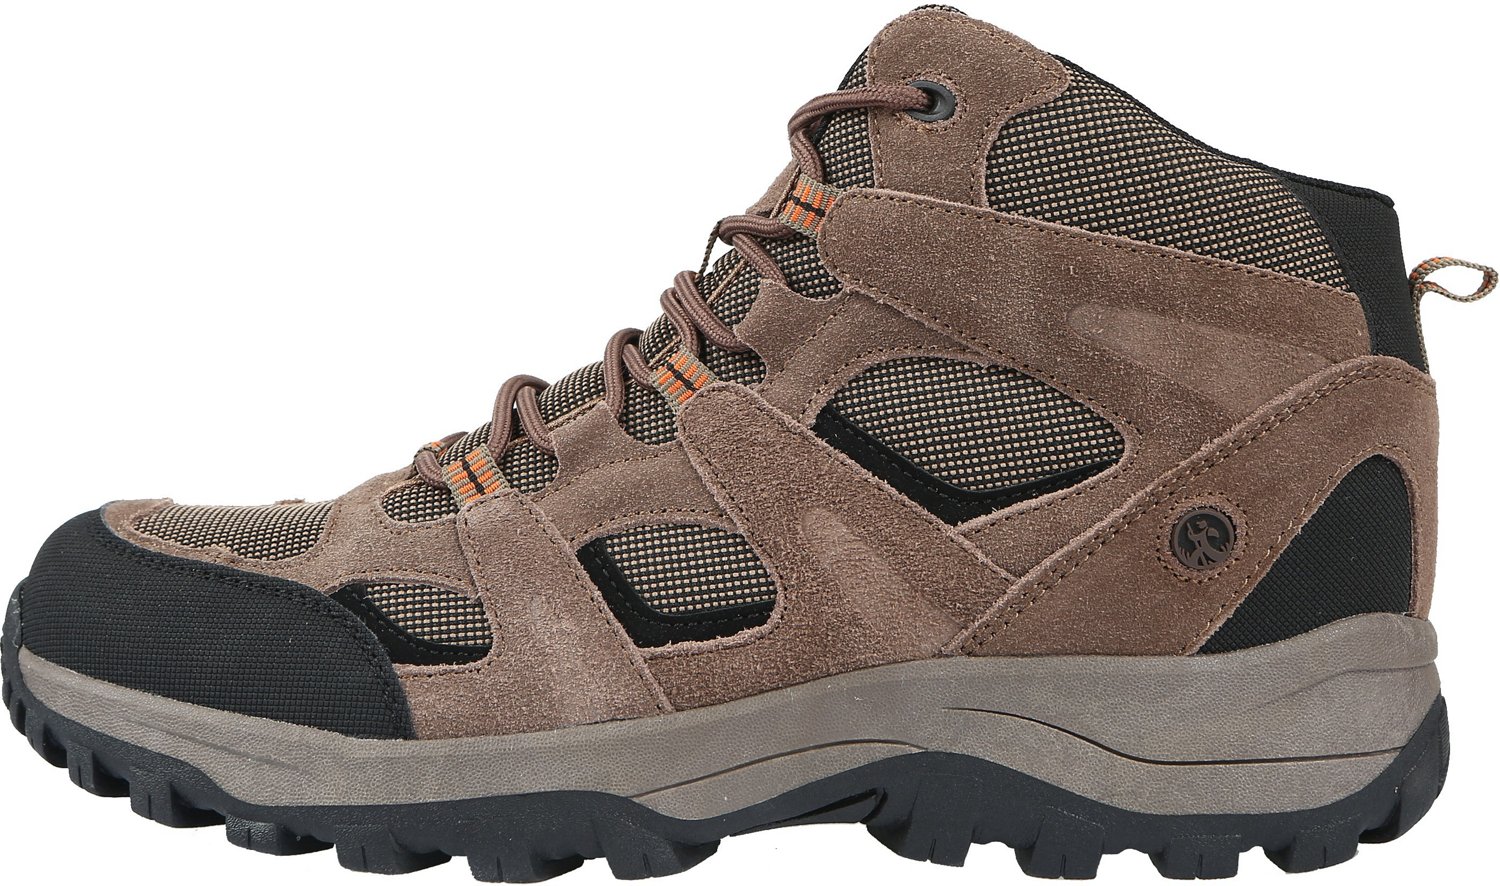 Northside Men's Monroe Hiking Boots | Free Shipping at Academy